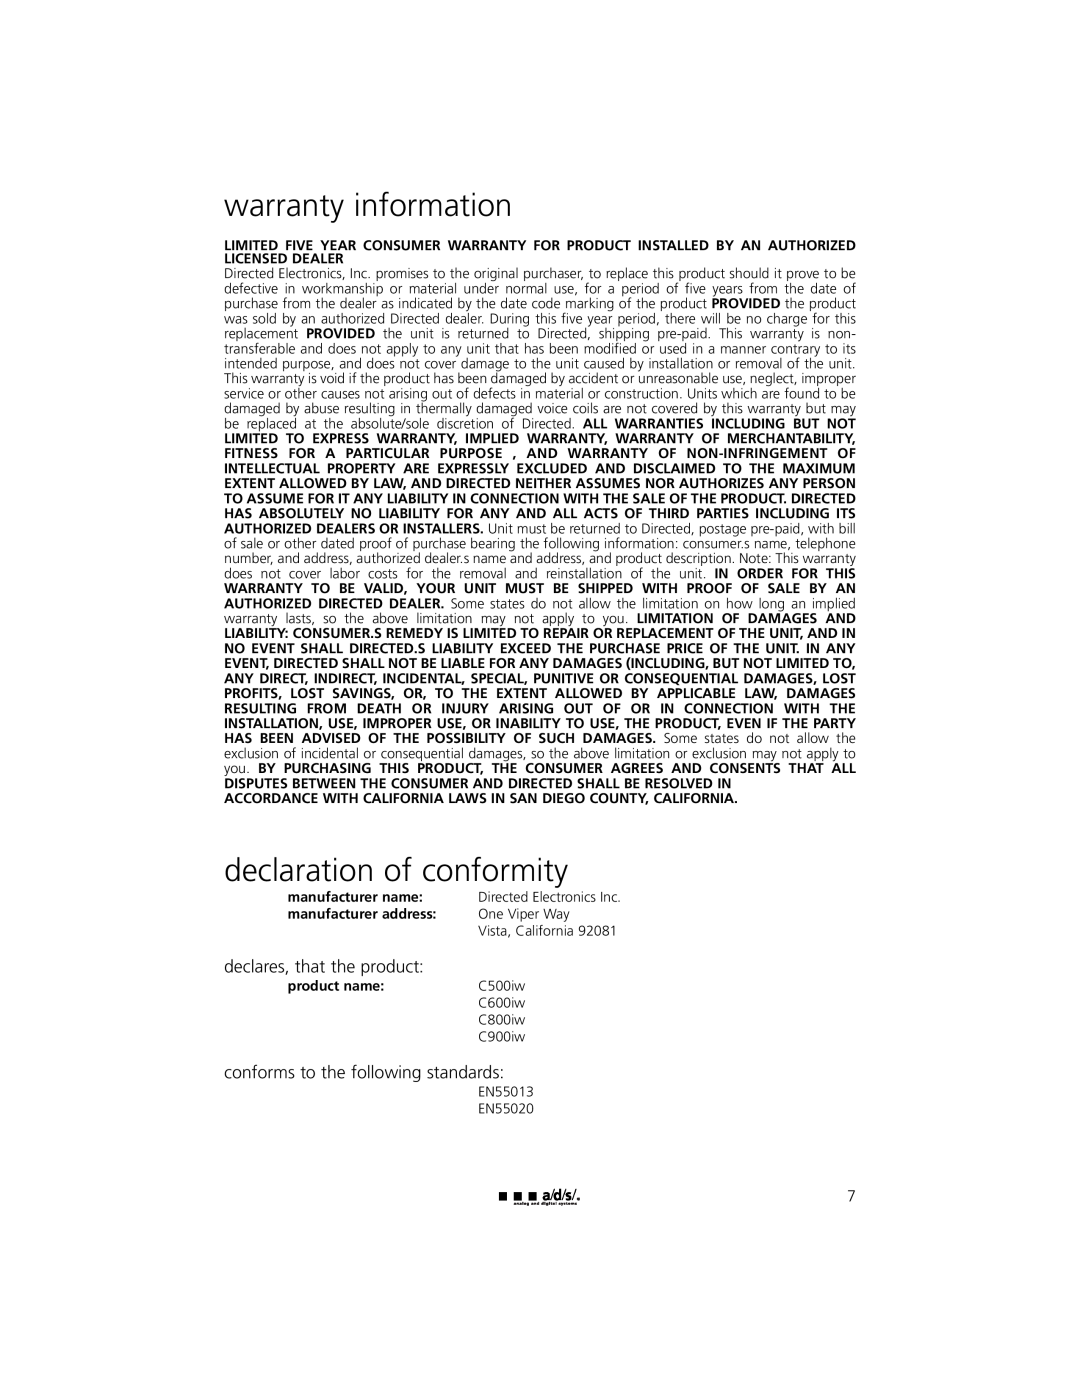 a/d/s/ C600iw warranty information, declaration of conformity, declares, that the product, manufacturer name, product name 